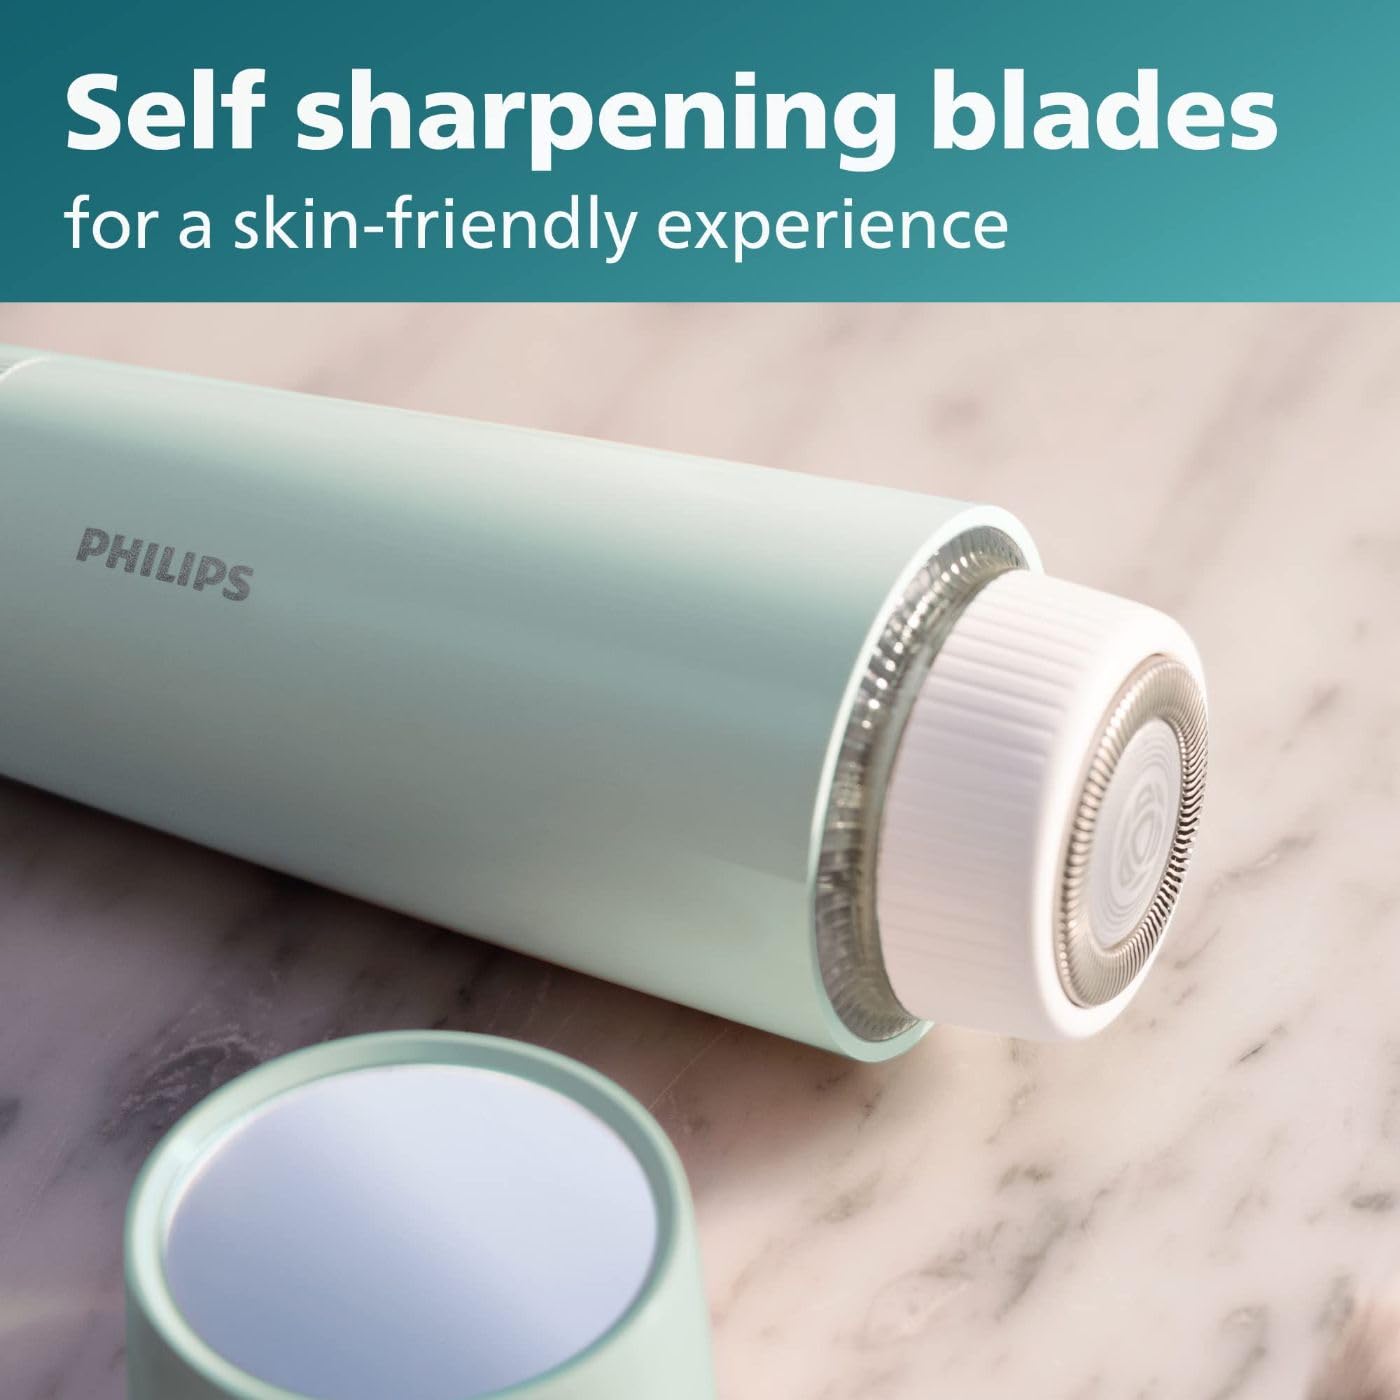 Philips Beauty Series 5000 Electric Facial Hair Remover for Women, Cordless & Compact, Wide Hypollergenic Head, Gentle & Quick Hair Removal Easy Finishing Touch Ups, BRR474/00